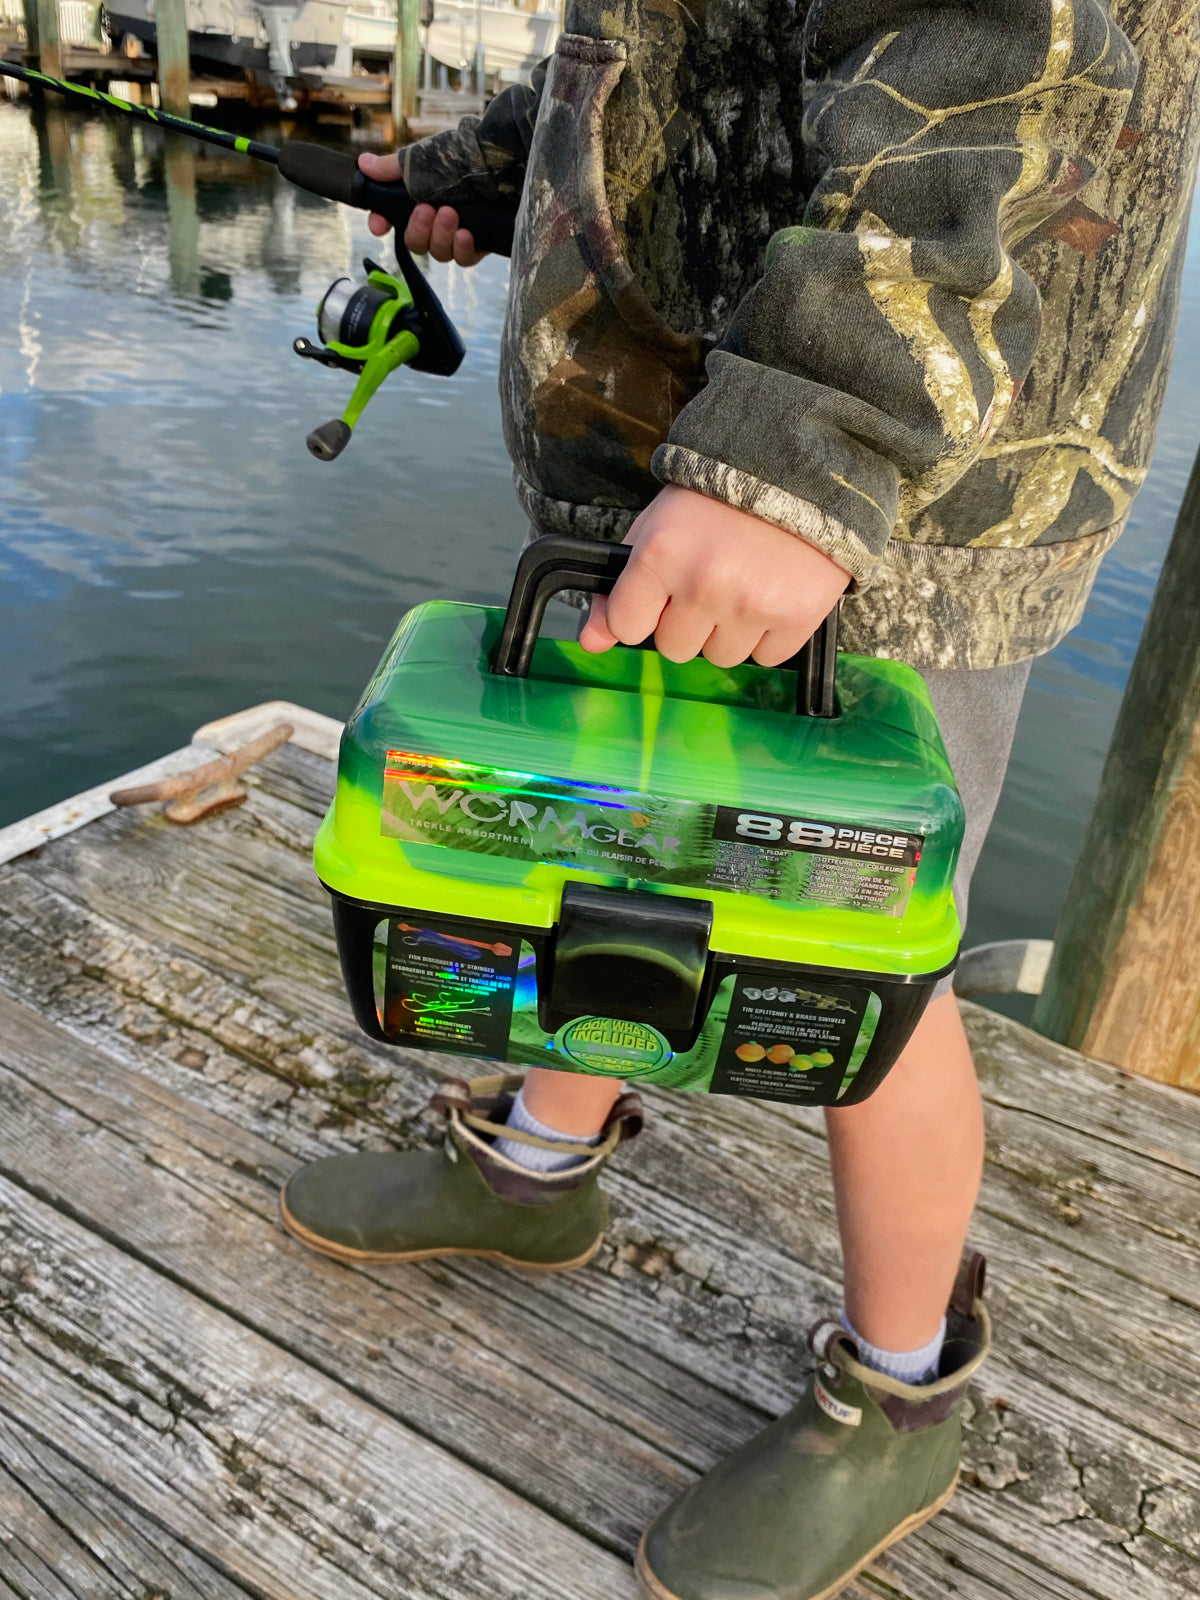 Worm Gear tackle box in youth hand